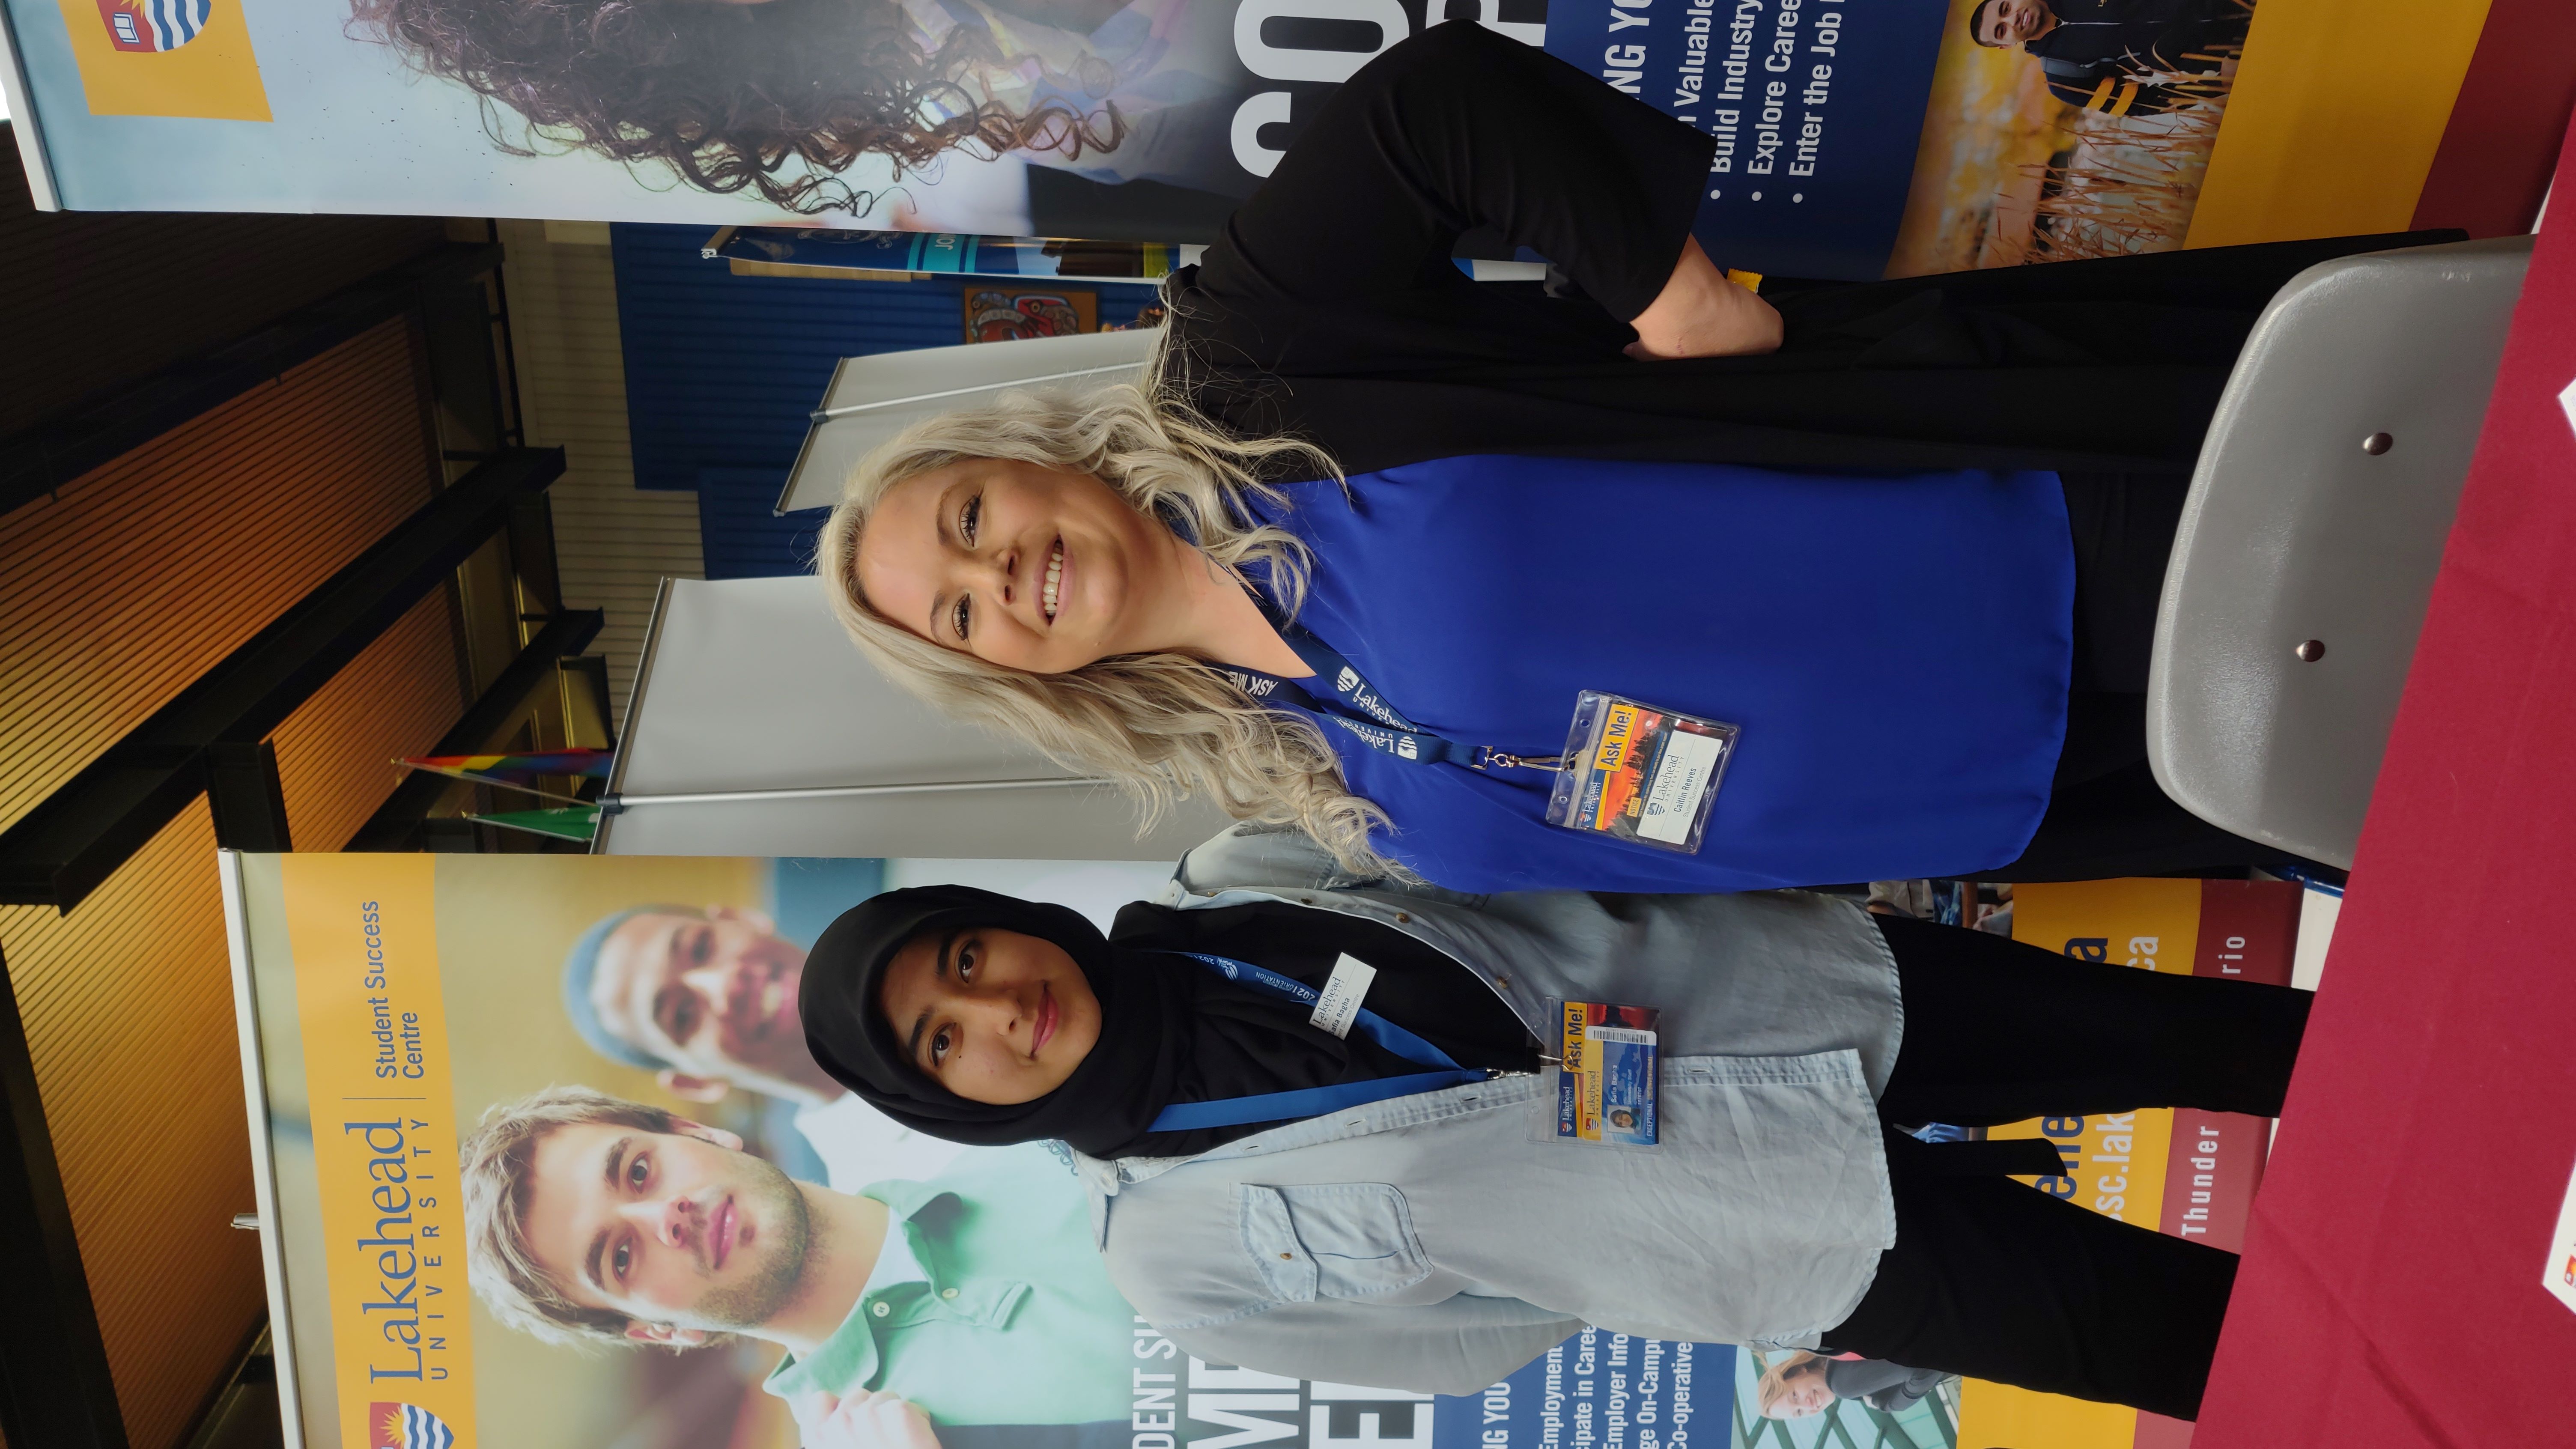 The Co-op Advisor with the Employer Relations Specialist at an event booth